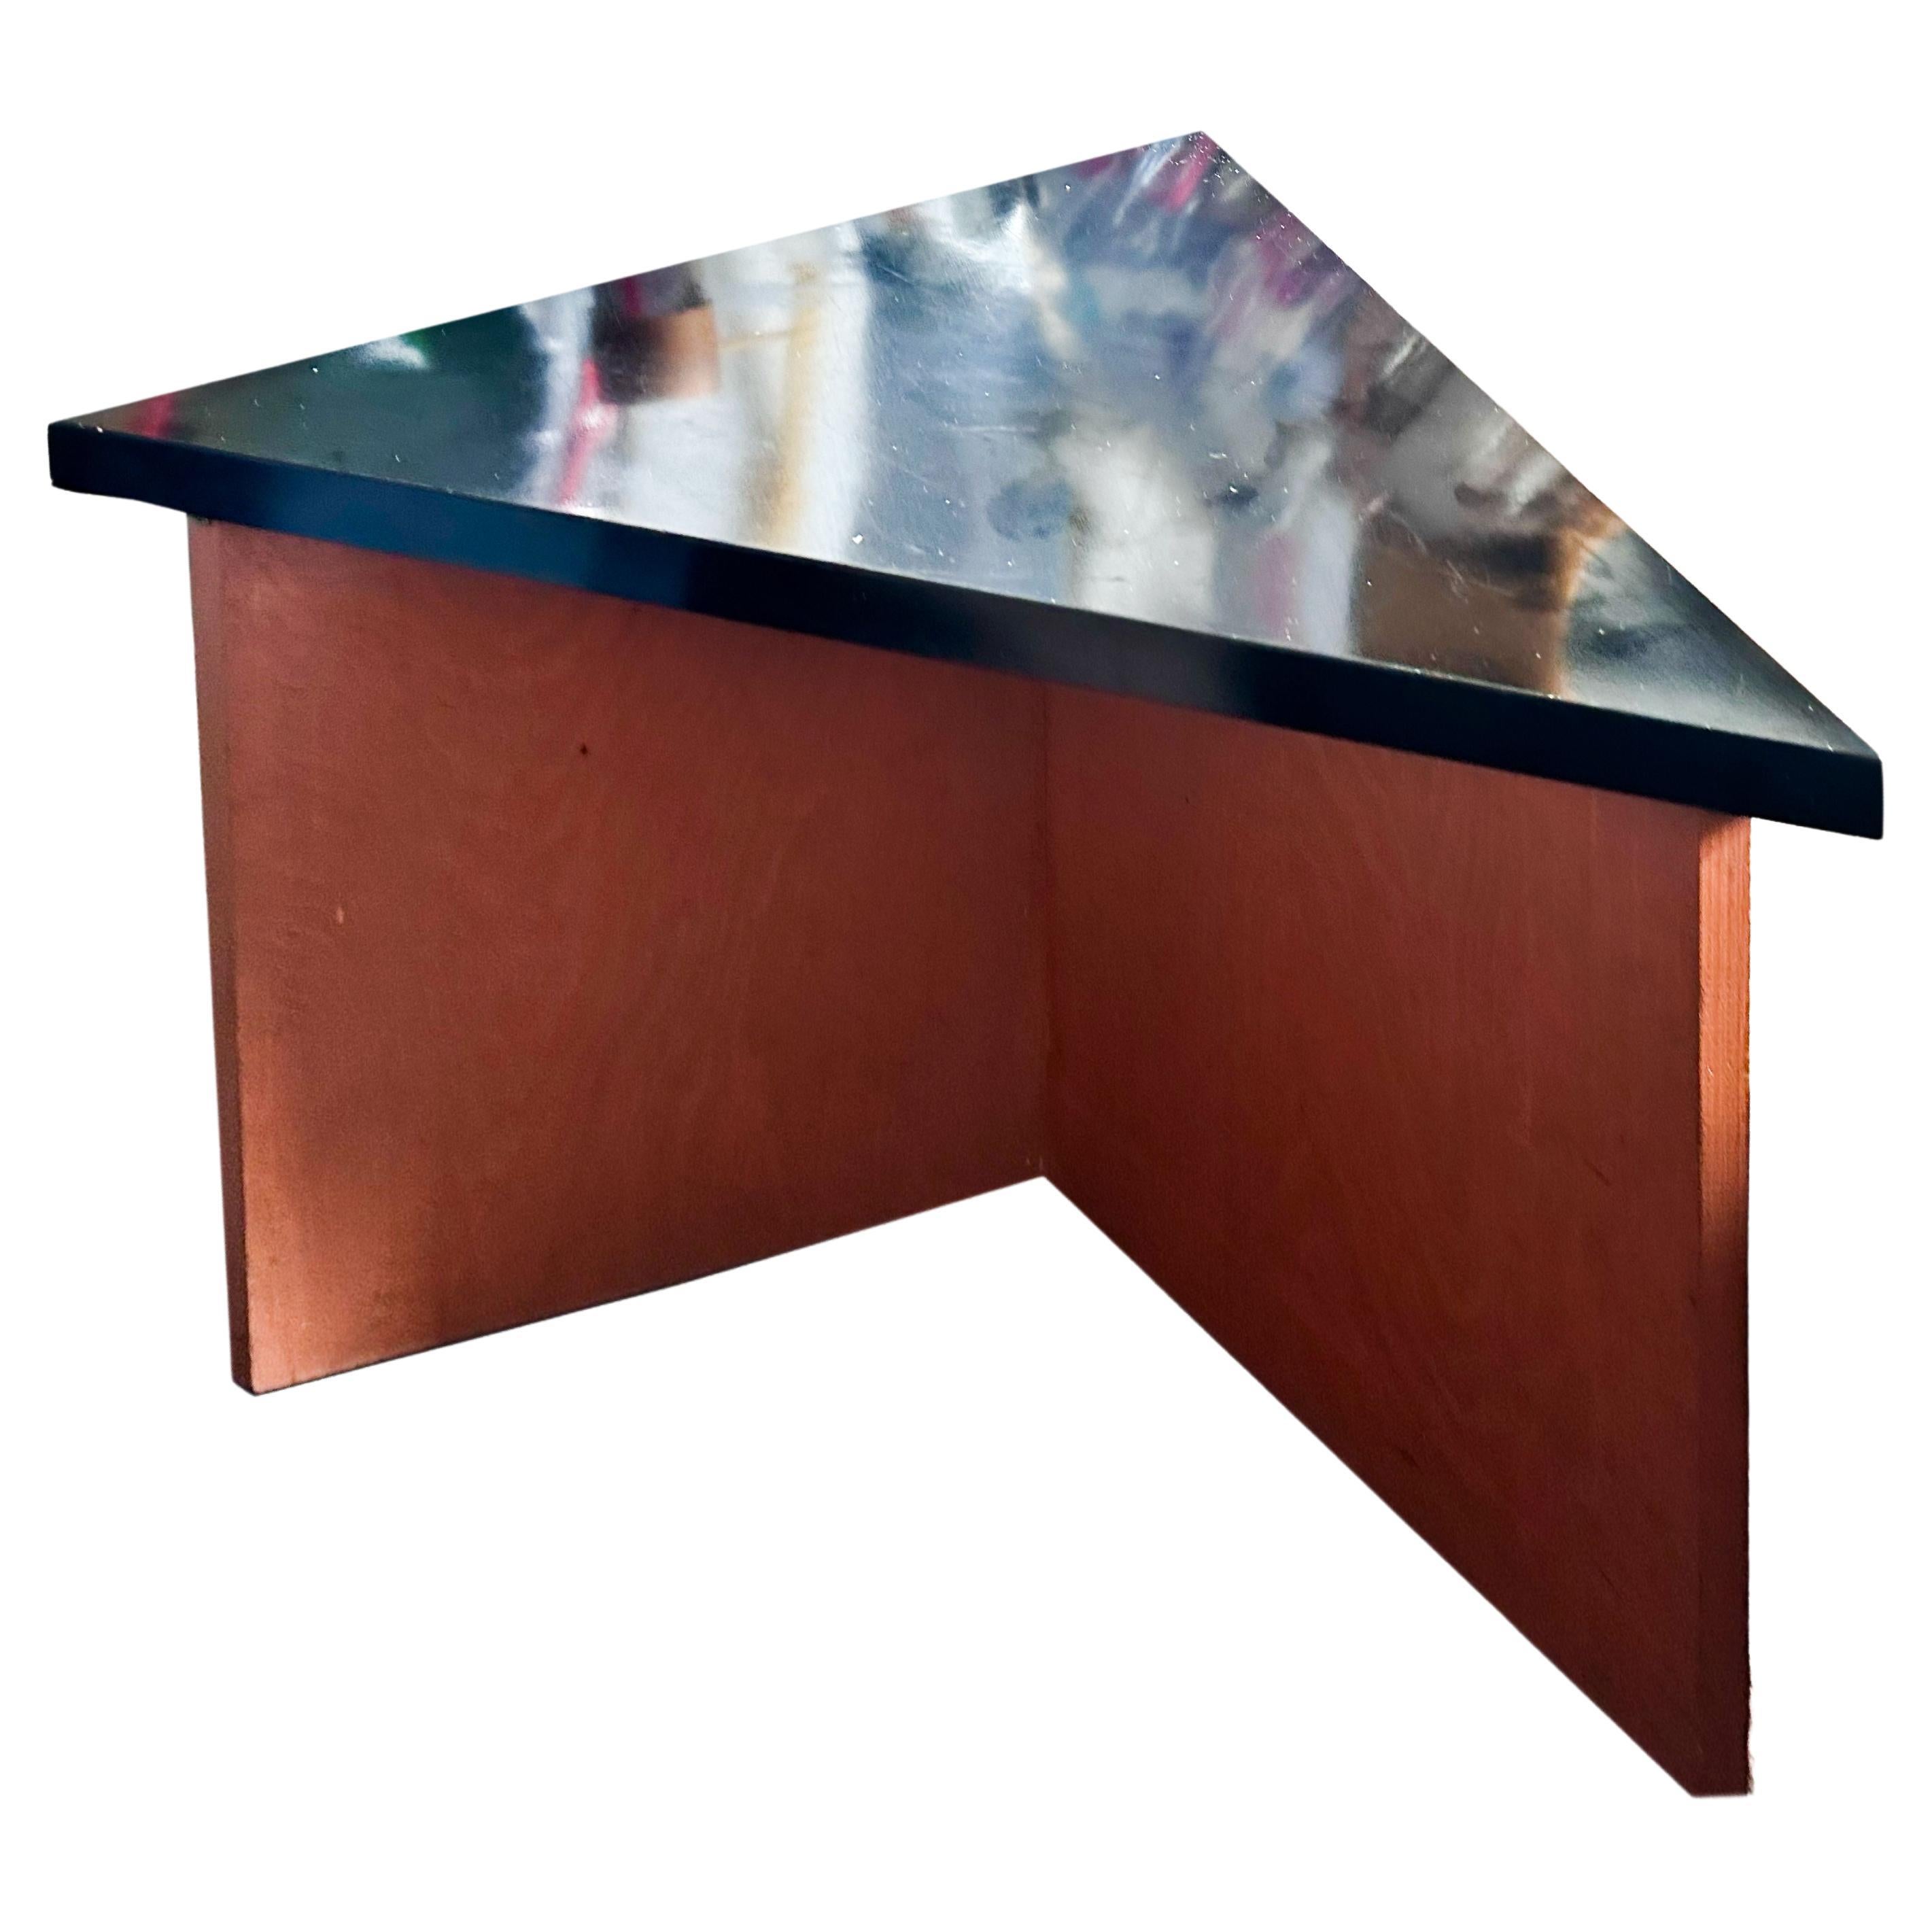 Frank Lloyd wright, Arnold house modular side table, Triangular, 1954. This listing is for one table.   The tables can be used together as a coffee table, two or three side tables or, of course, independently. These were designed by Frank Lloyd